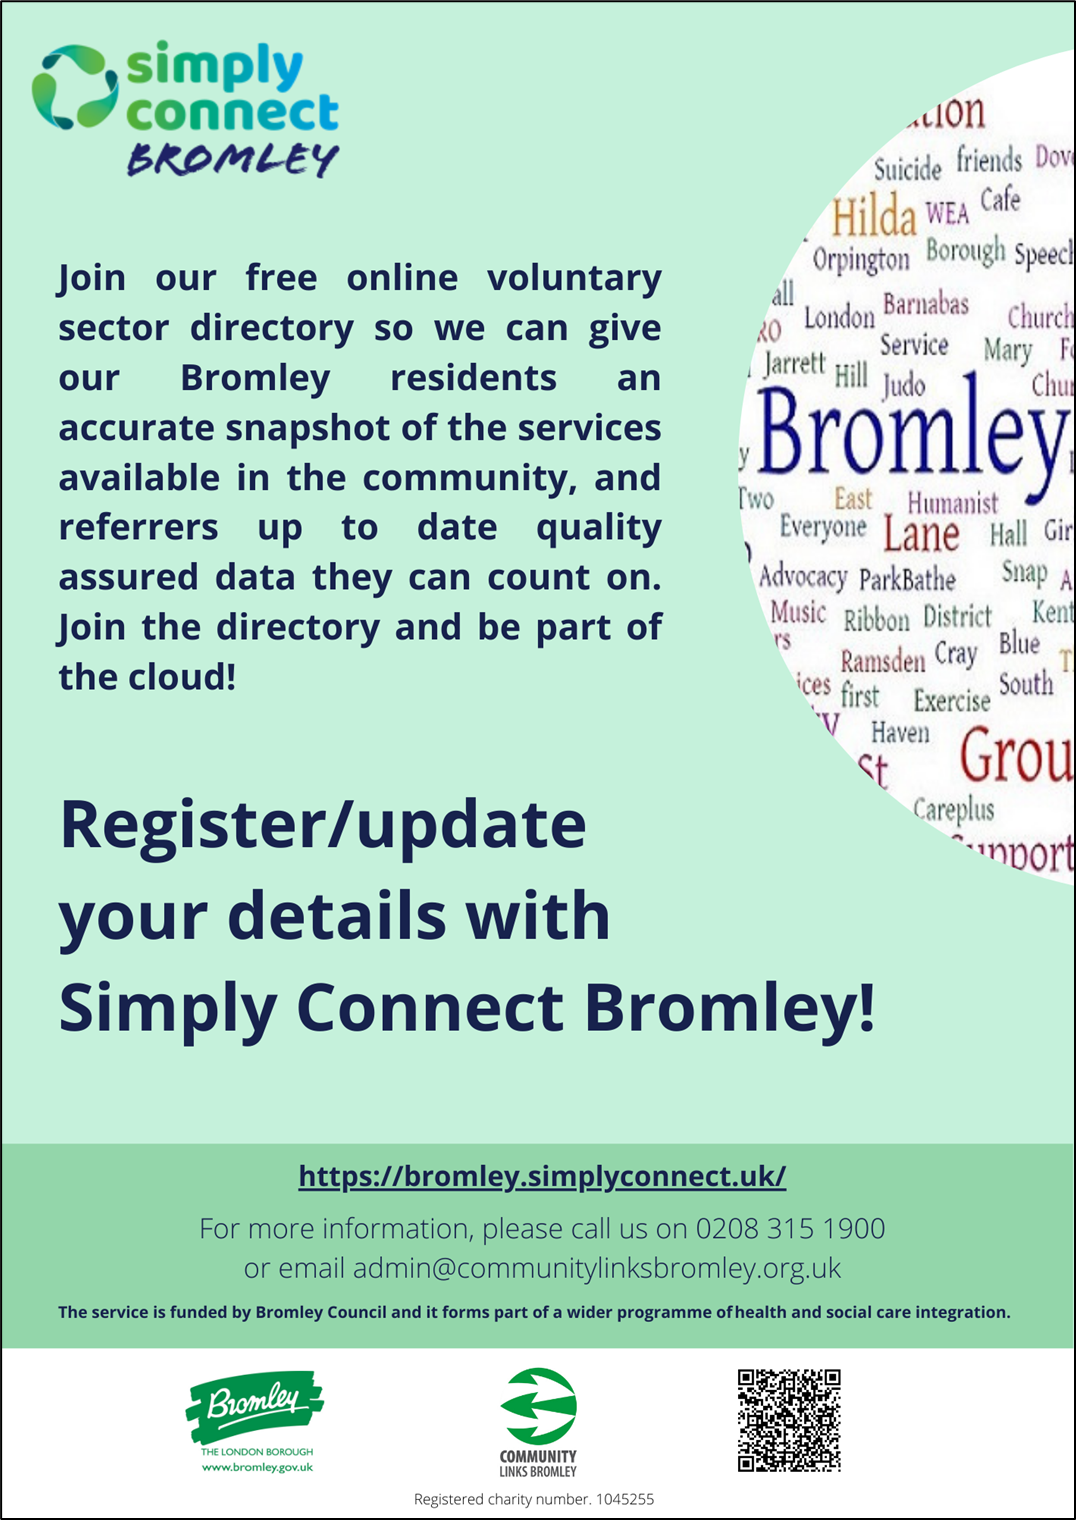 Poster with information about Simply Connect Bromley